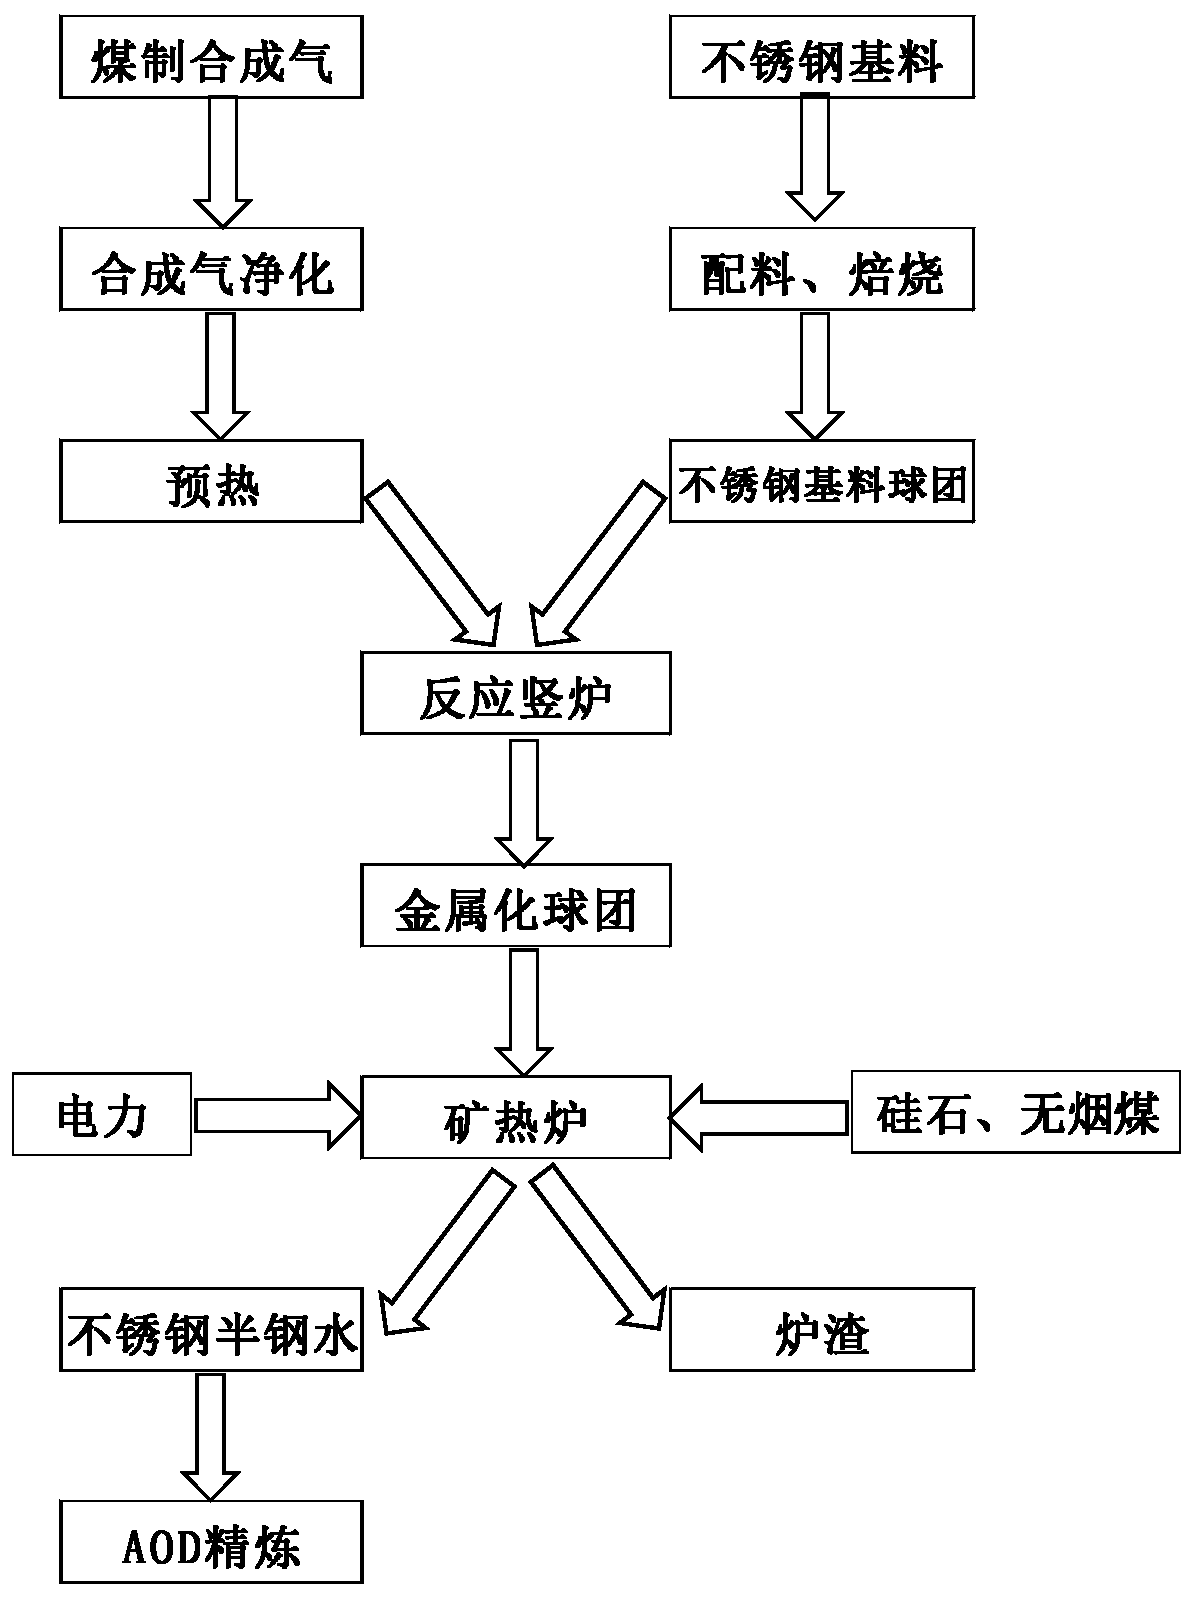 Process of producing stainless steel molten semisteel by coal-made synthesis gas